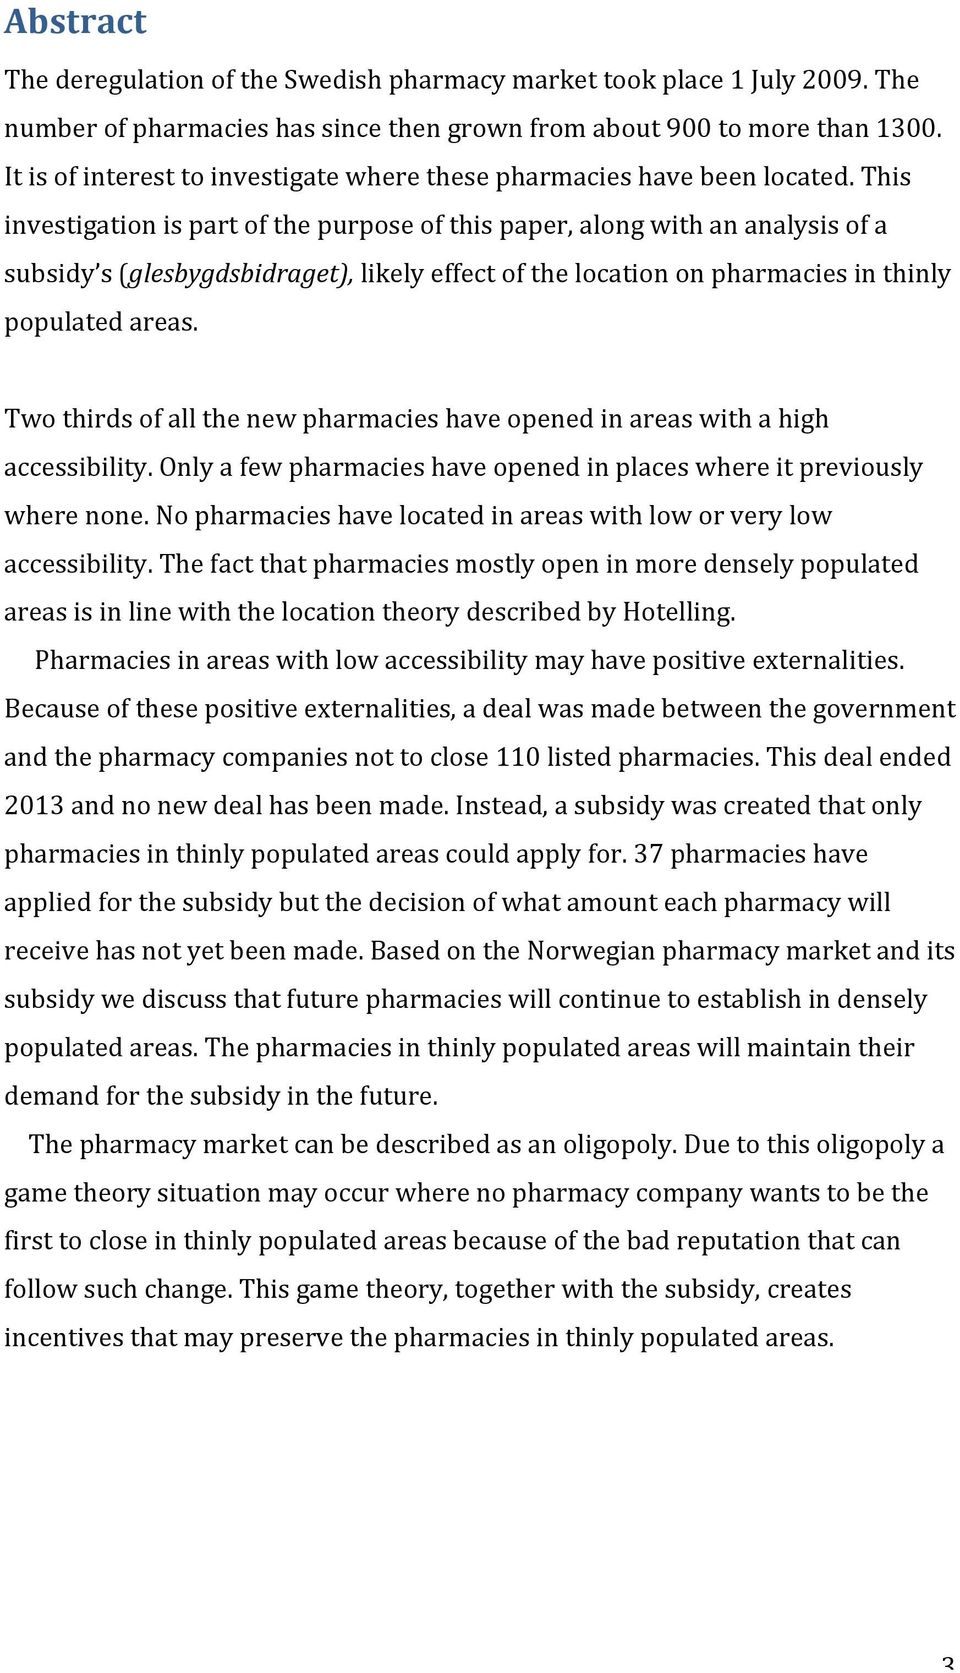 This investigation is part of the purpose of this paper, along with an analysis of a subsidy s (glesbygdsbidraget), likely effect of the location on pharmacies in thinly populated areas.